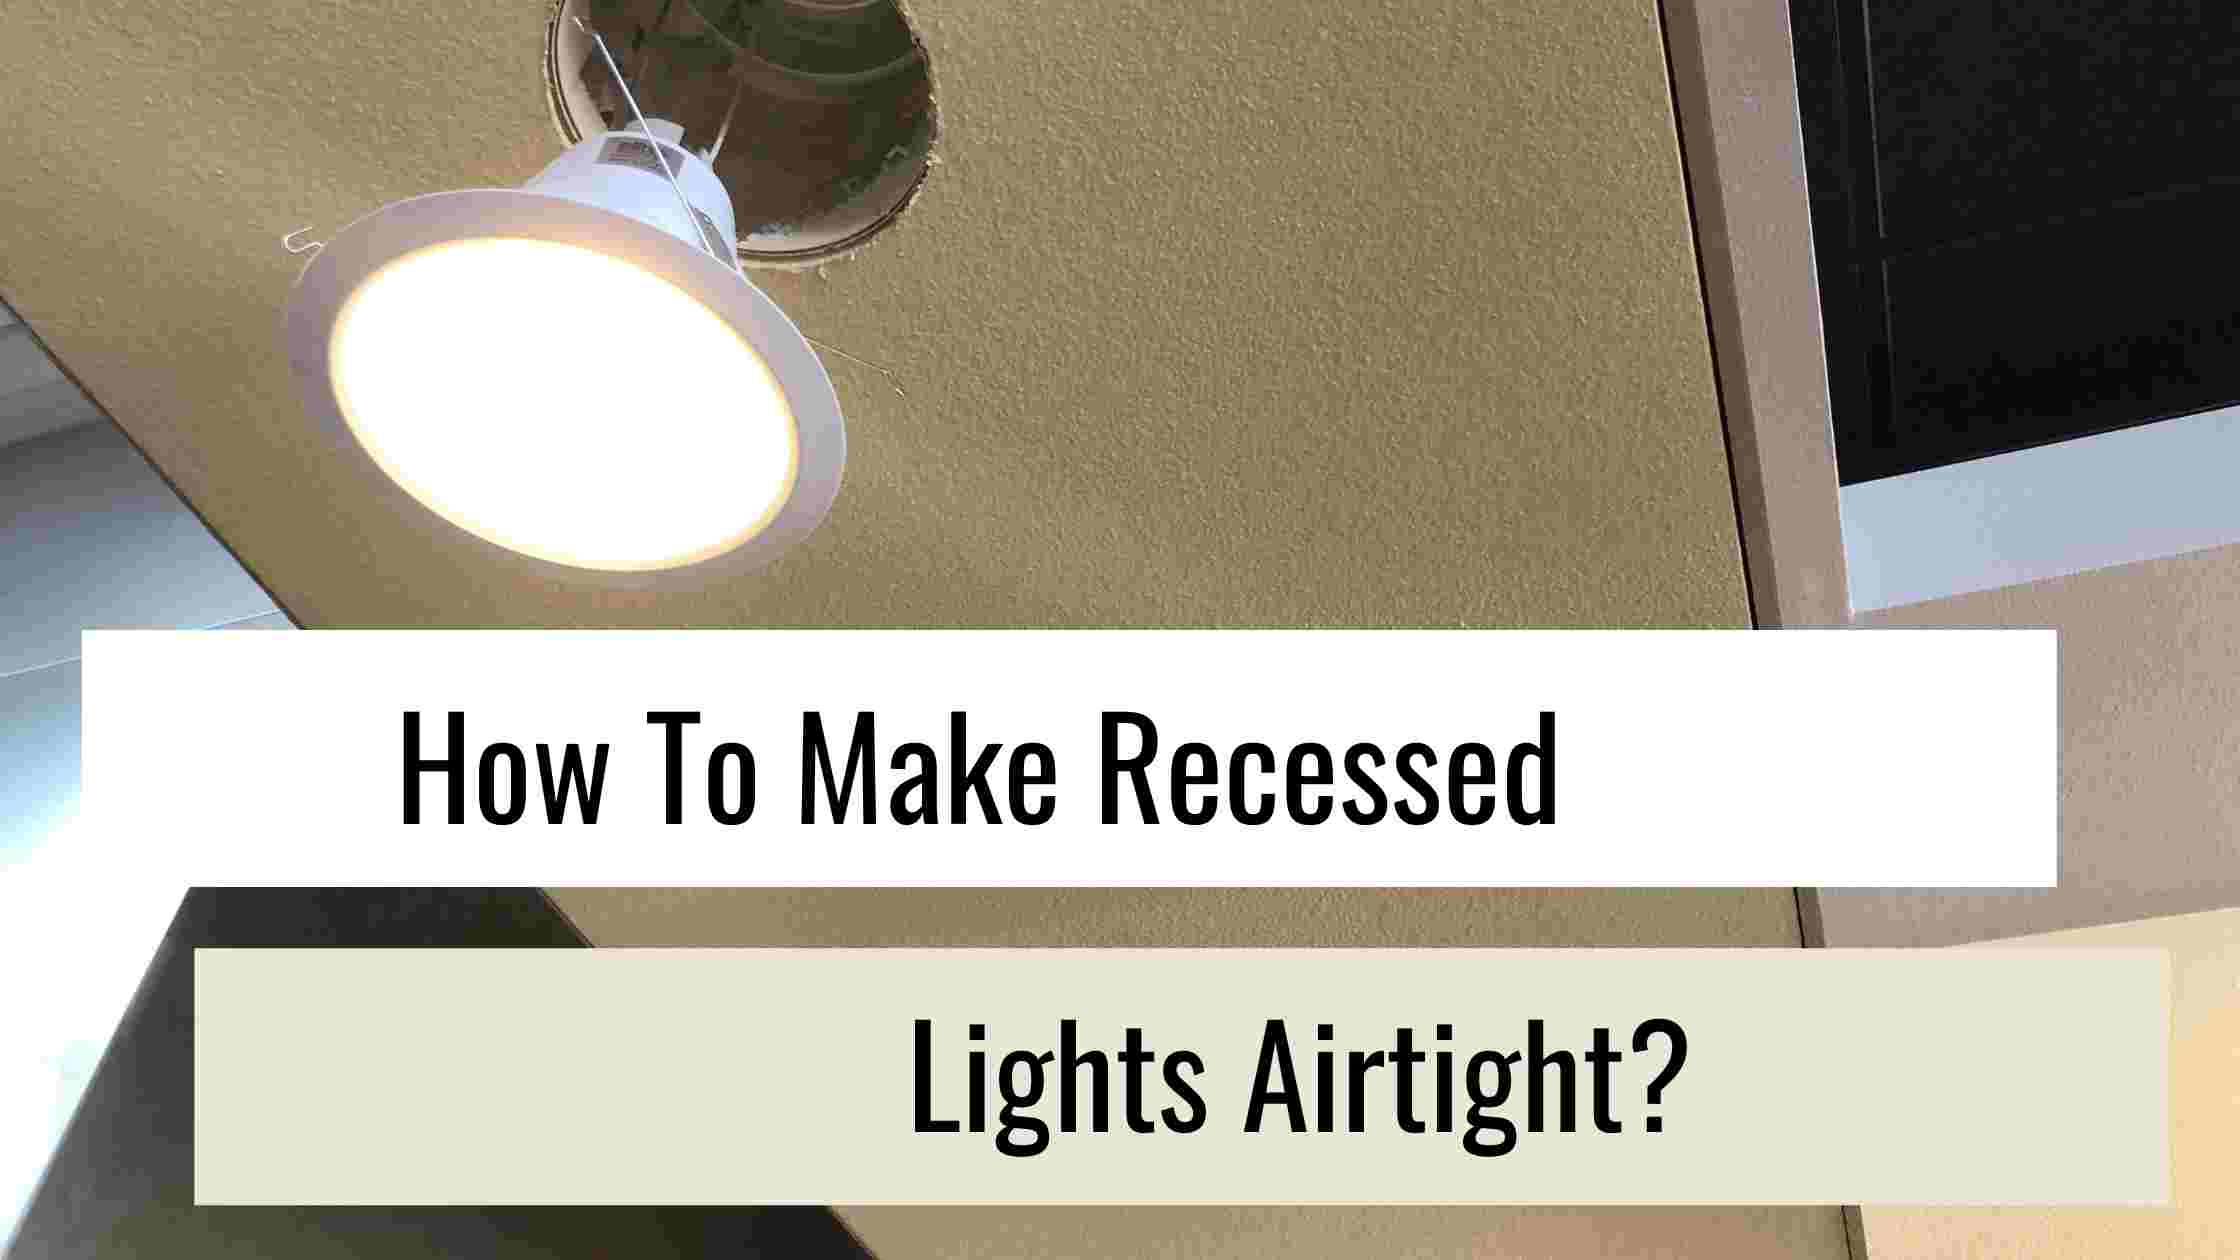 How to make recessed lights airtight